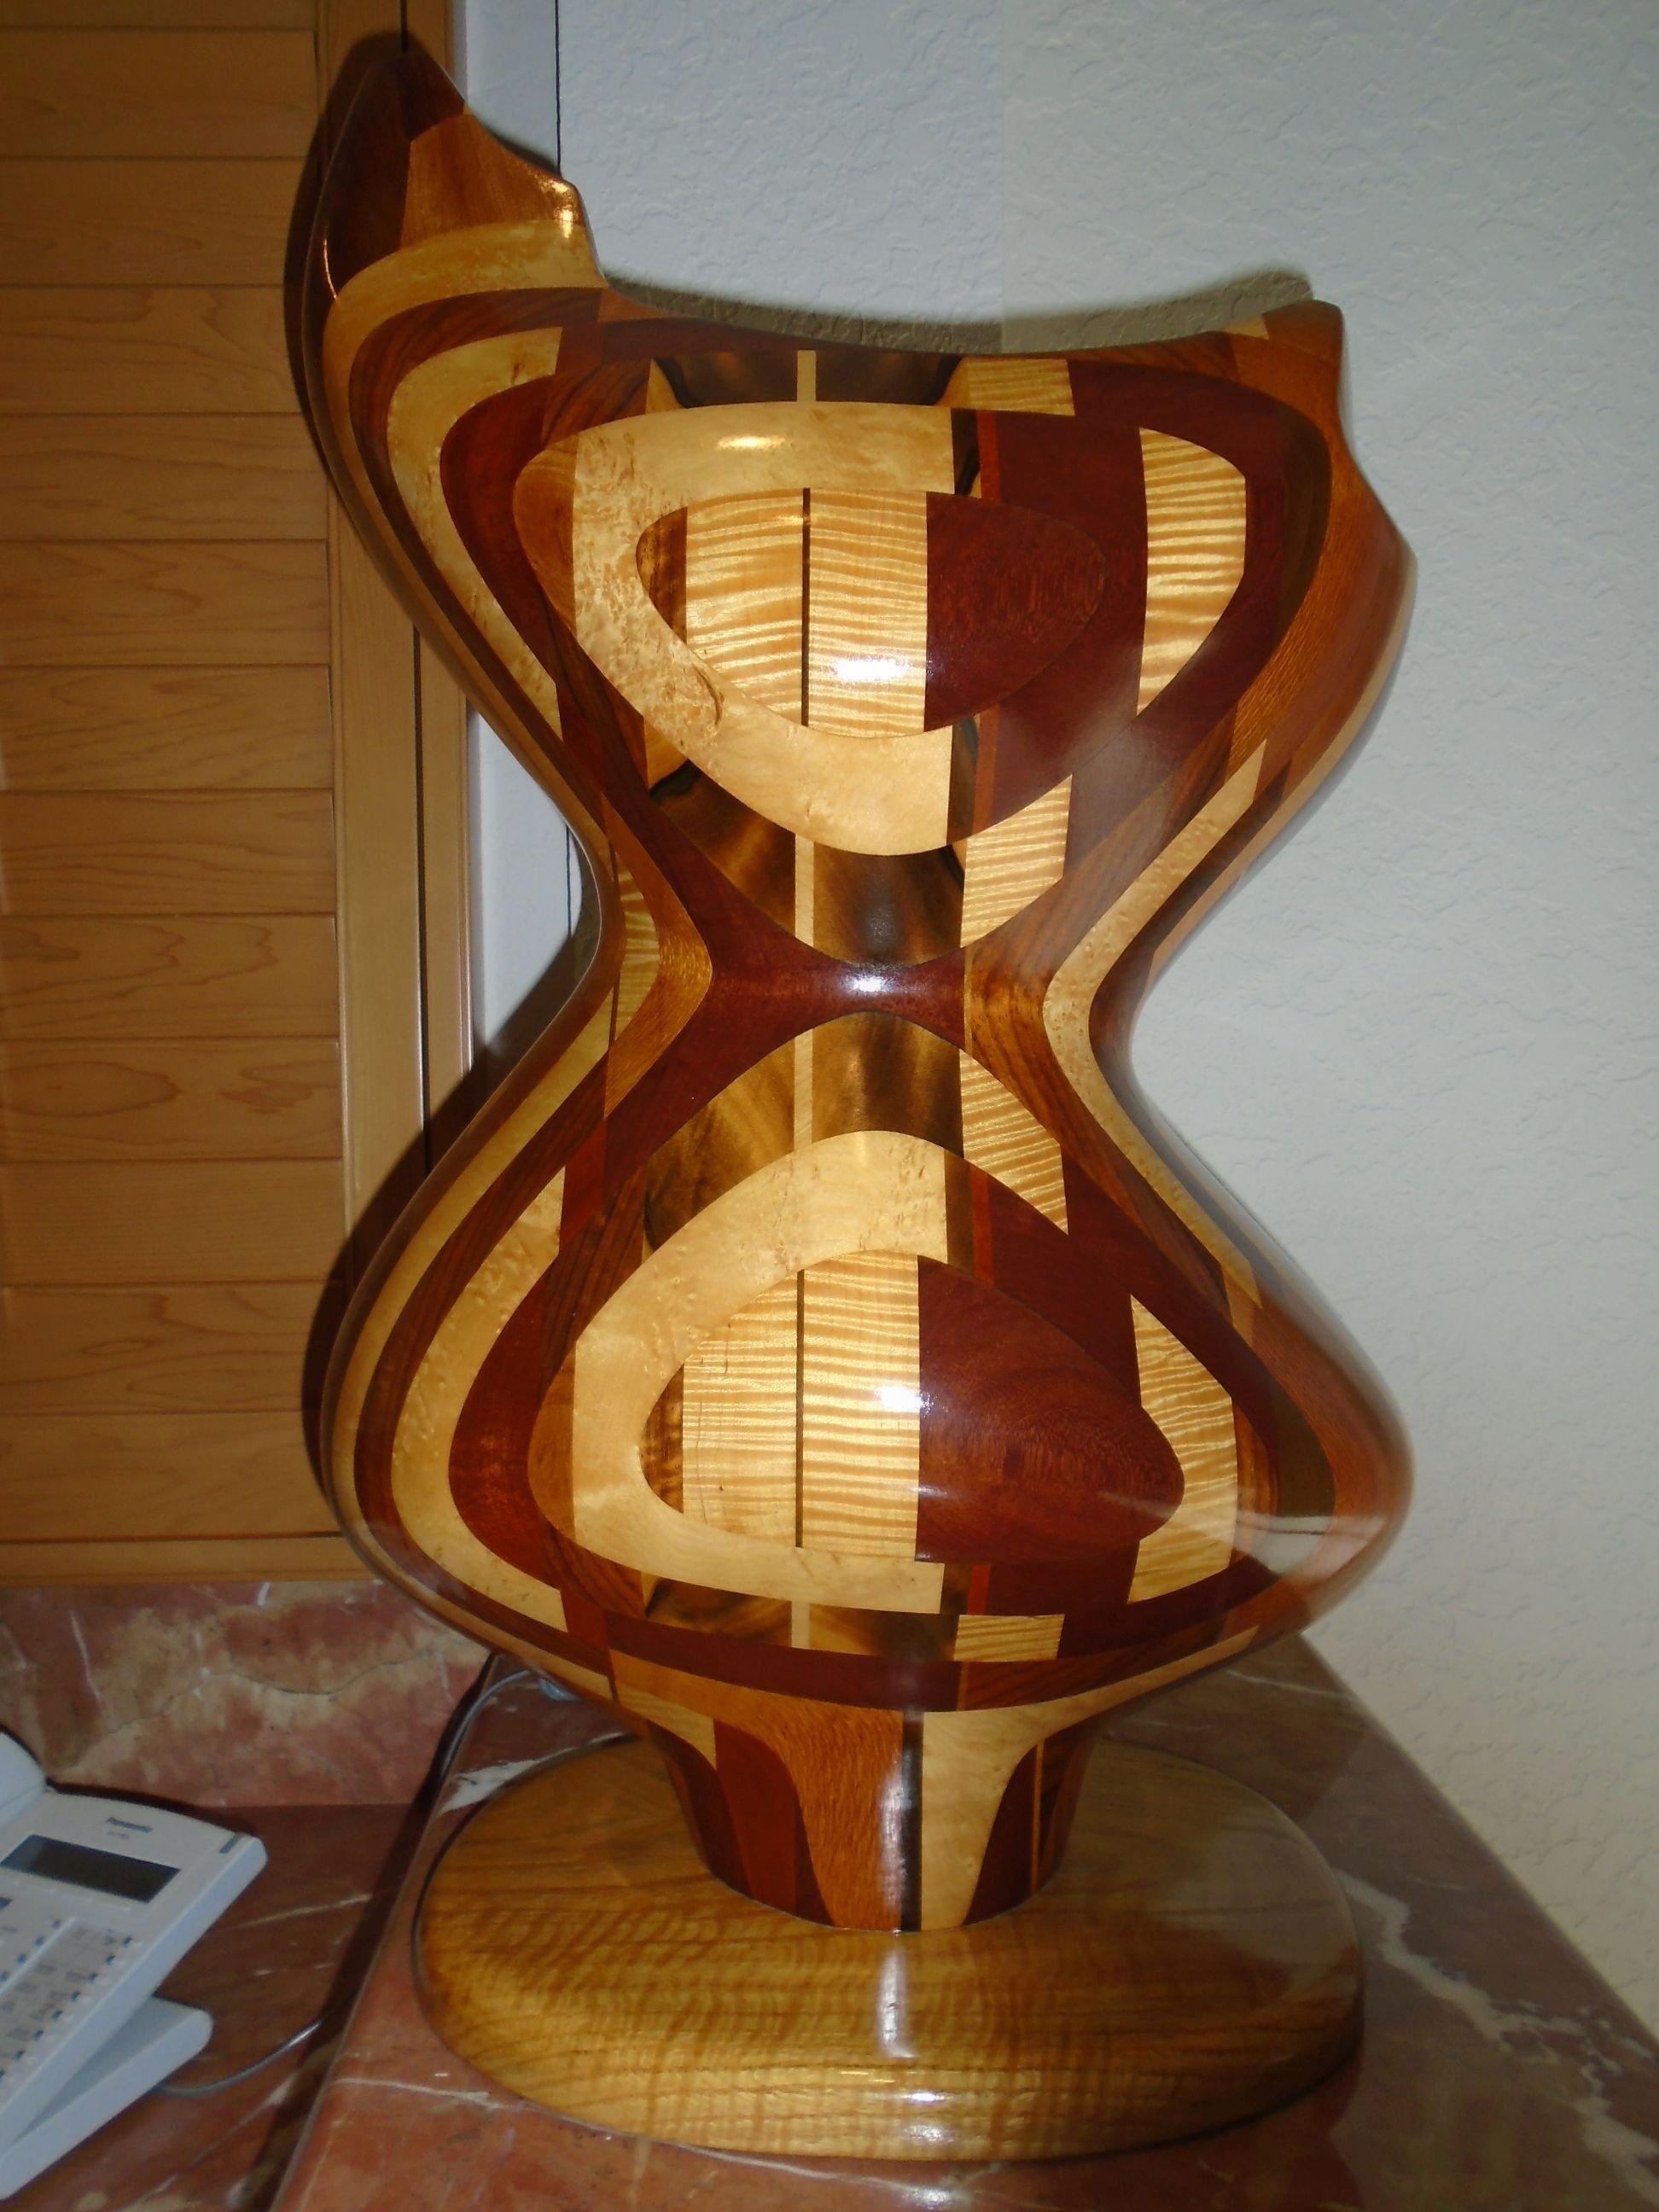 Large curvy shaped wood sculpture on a wood base.